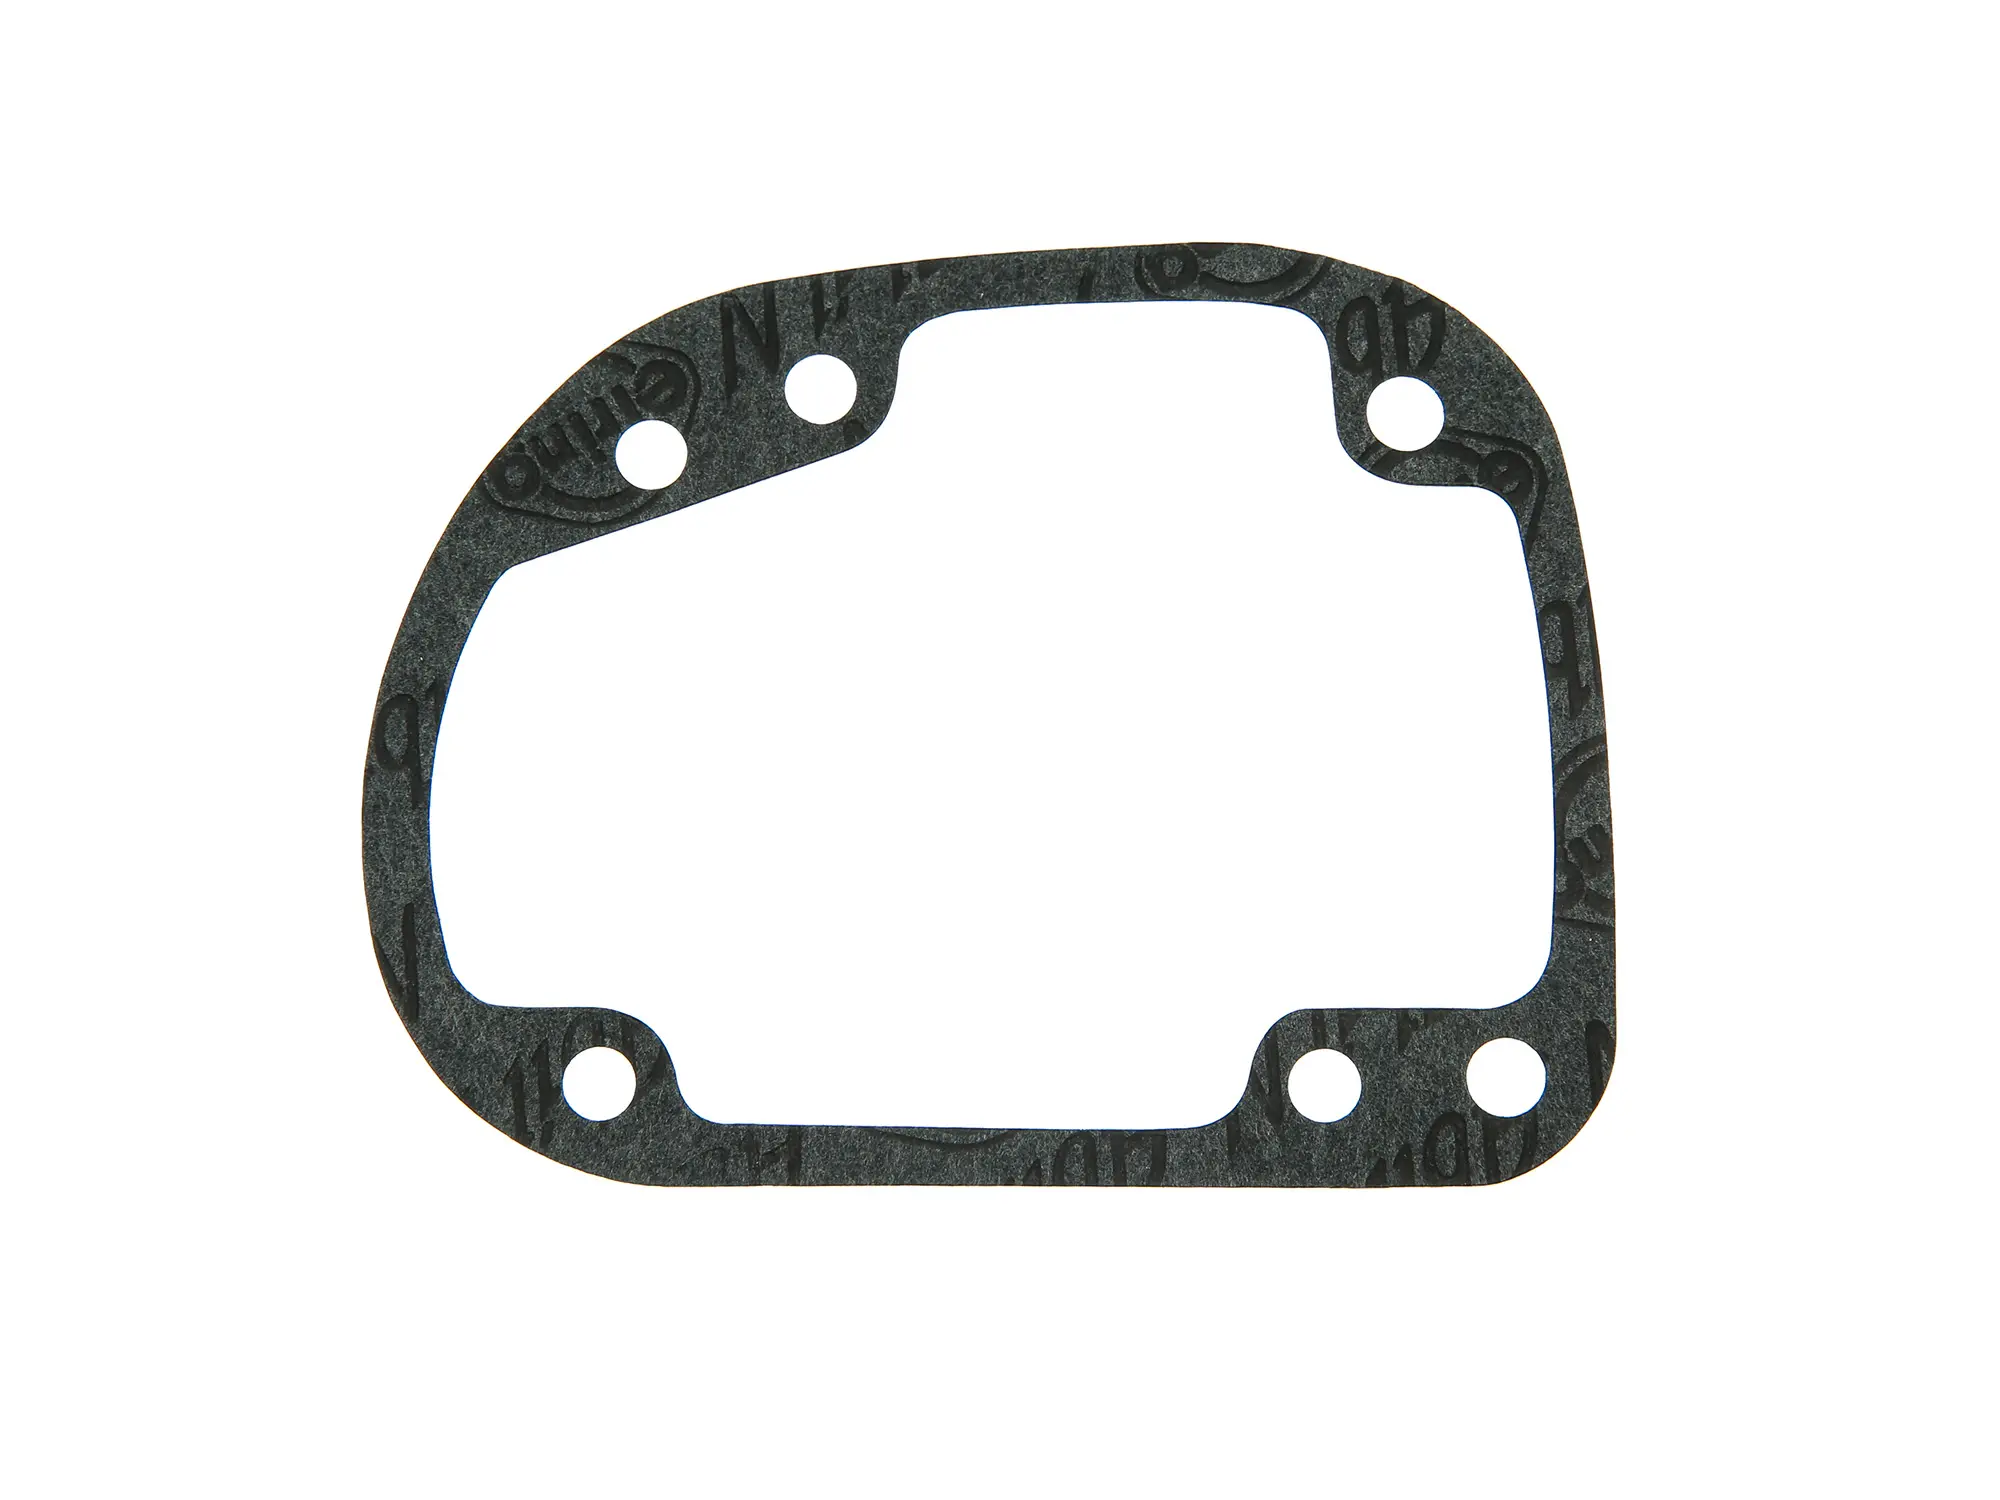 Gasket for bearing flange - foot control - suitable for AWO 425T - old version (brand: PLASTANZA / material ABIL), Item no: 10059396 - Image 1